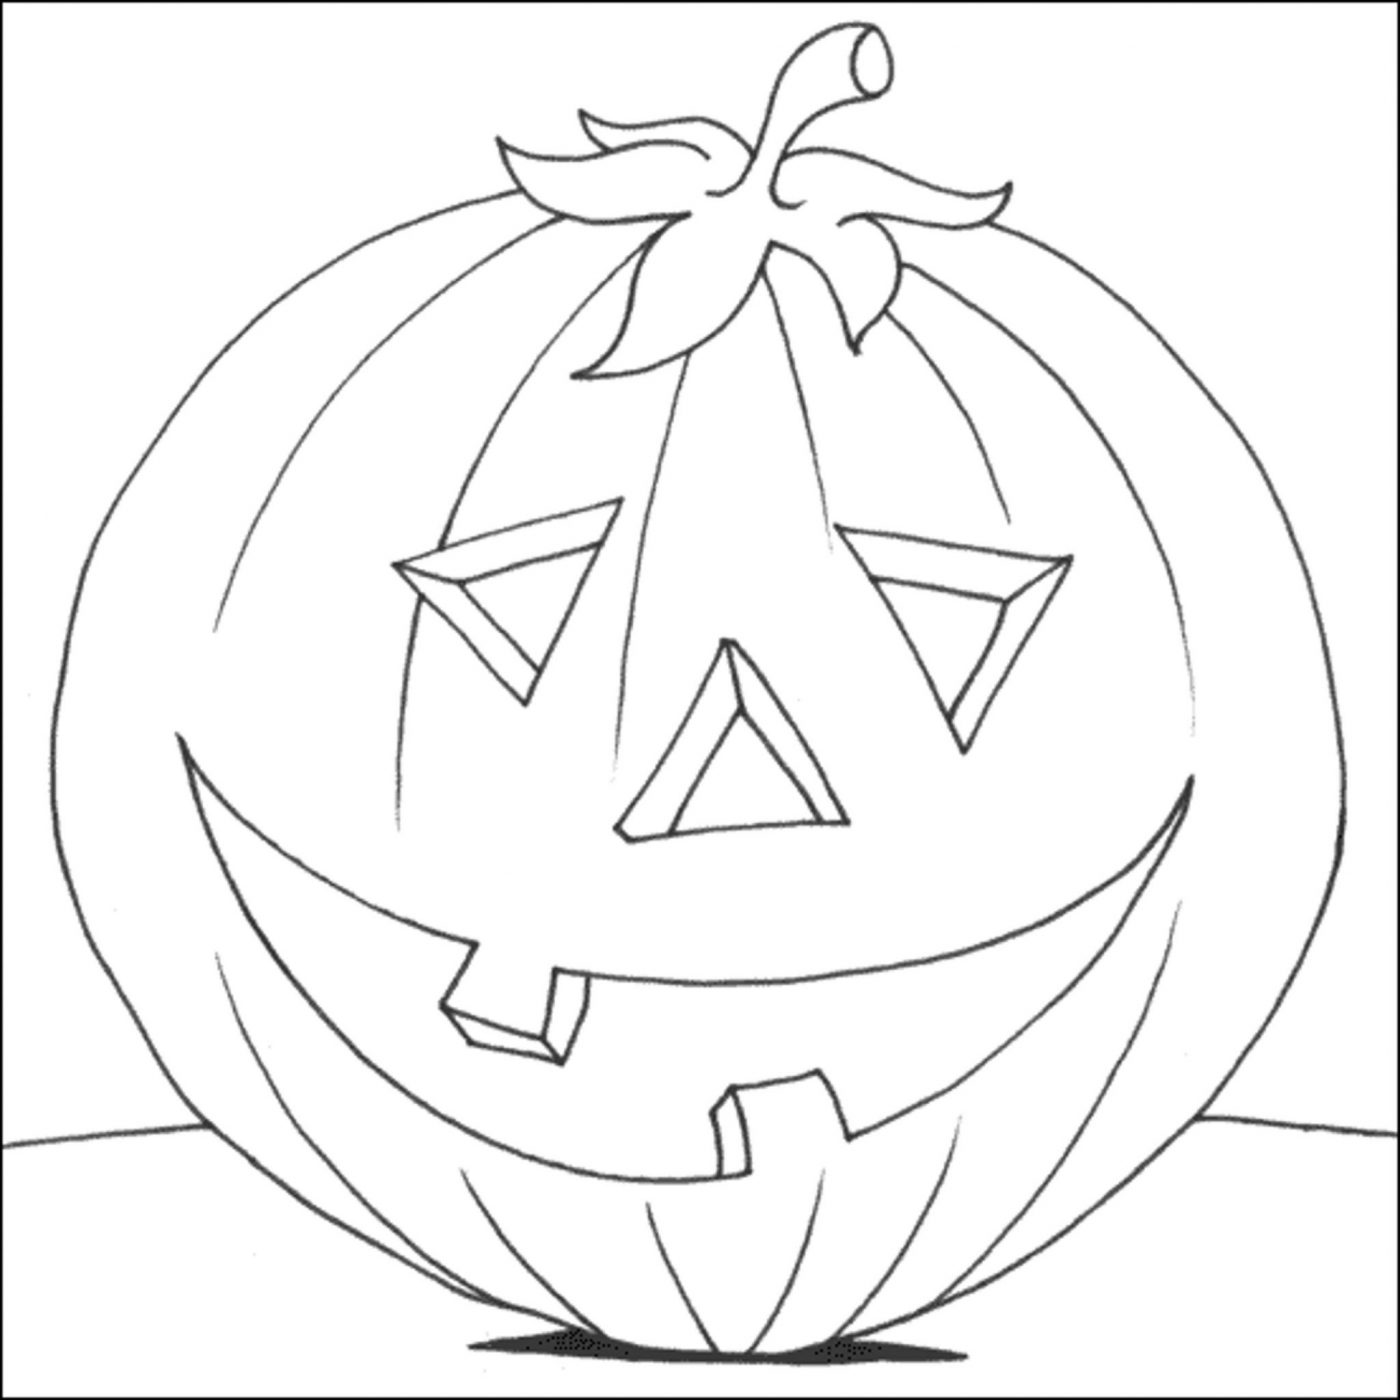 Print Download Pumpkin Coloring Pages and Benefits of Drawing for Kids